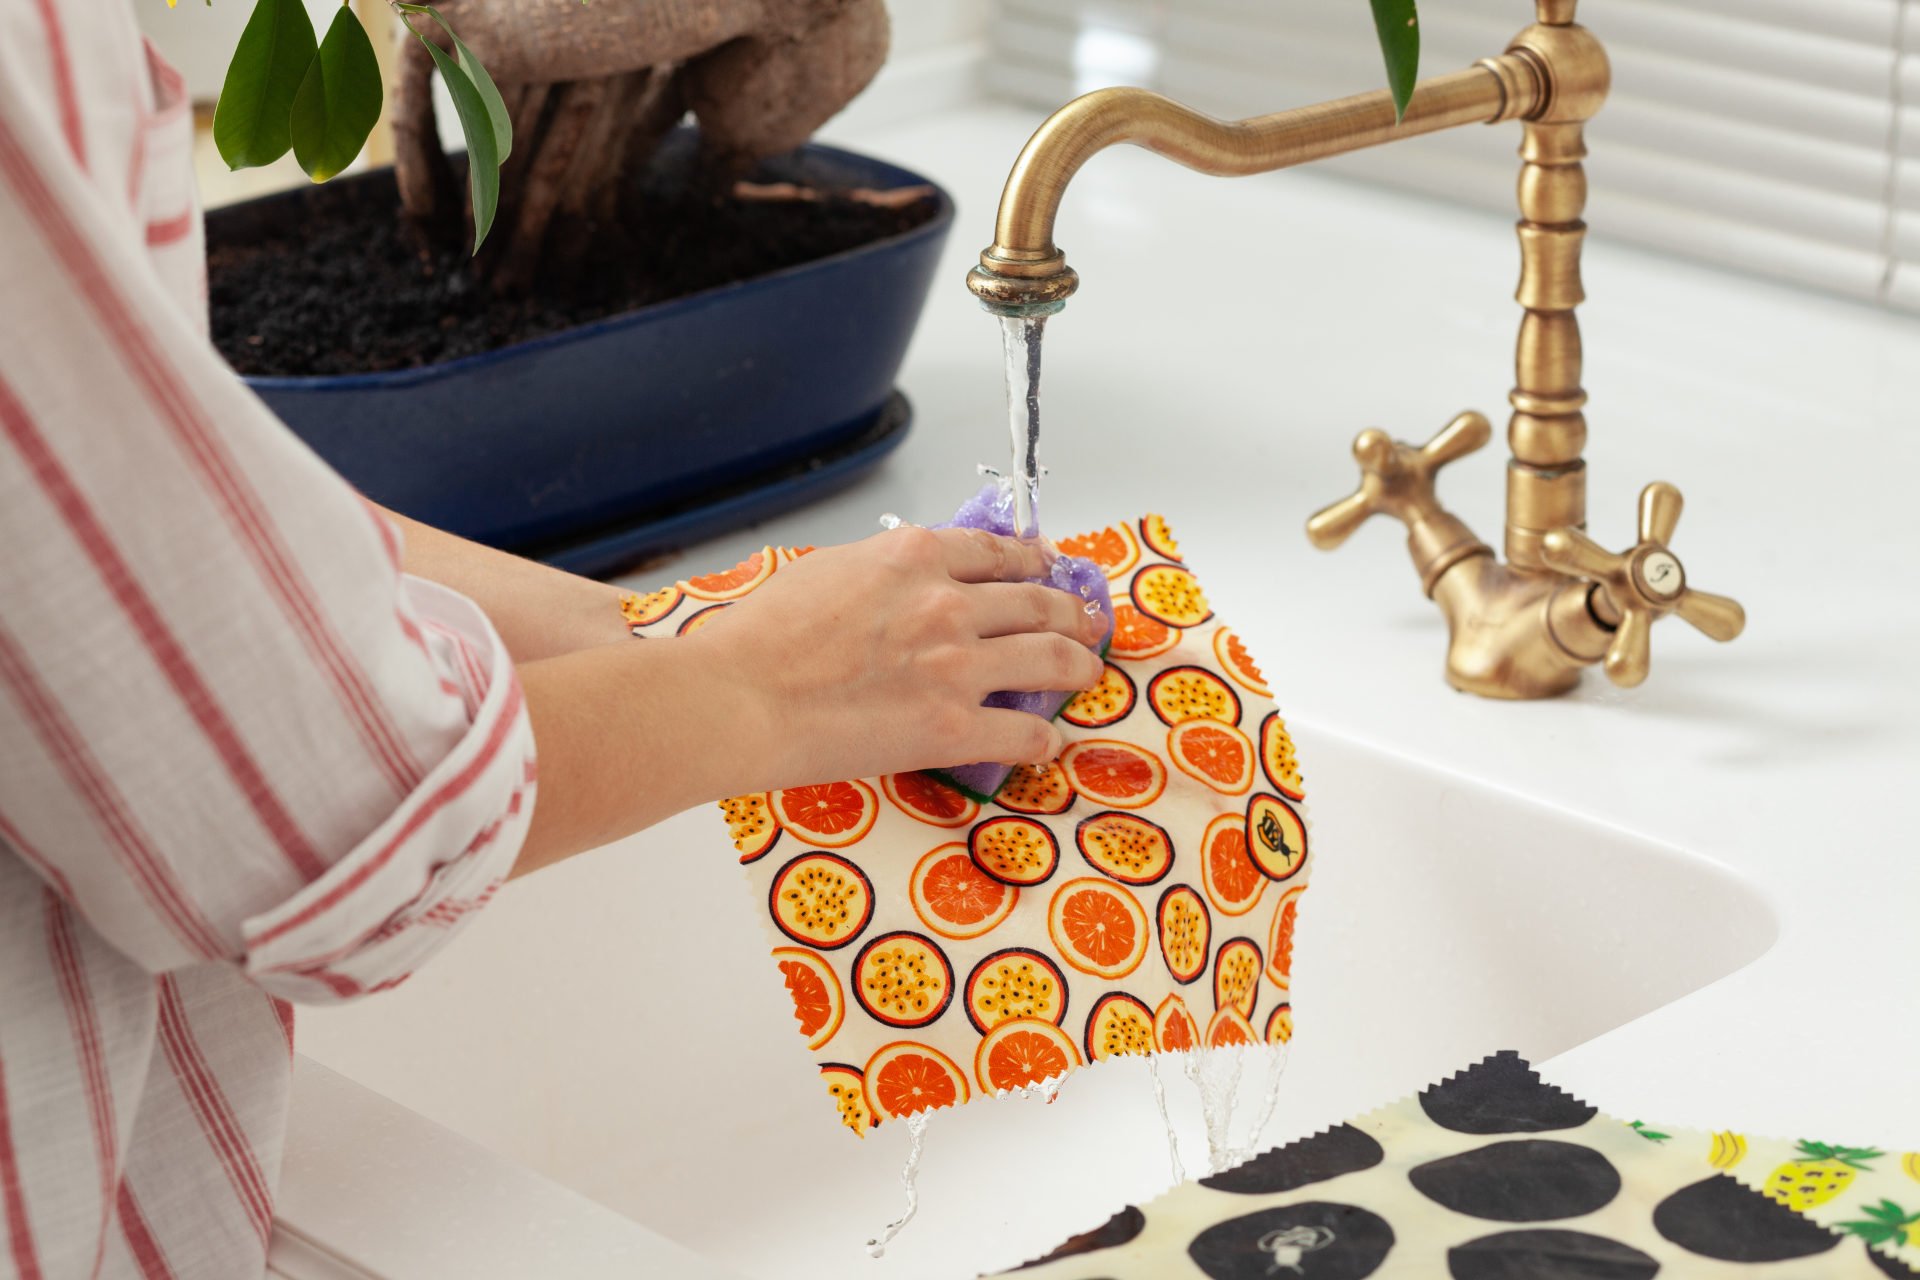 How Do You Clean Beeswax Wraps?